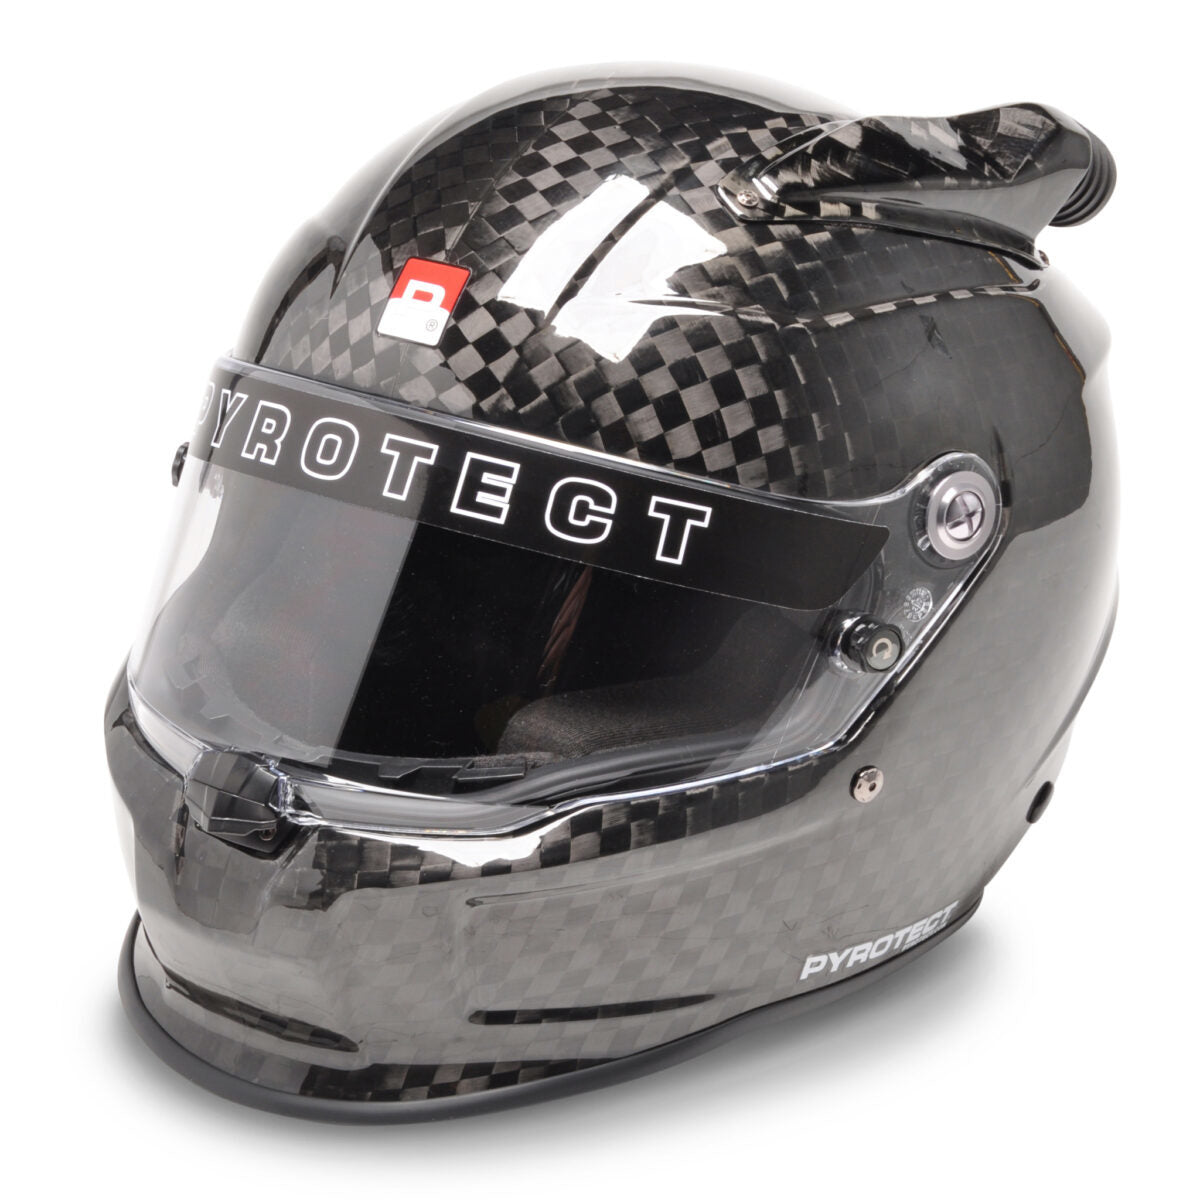 Pyrotect Helmet Pro Flat Carbon Large Mid-Air SA2020 Helmets and Accessories Helmets main image